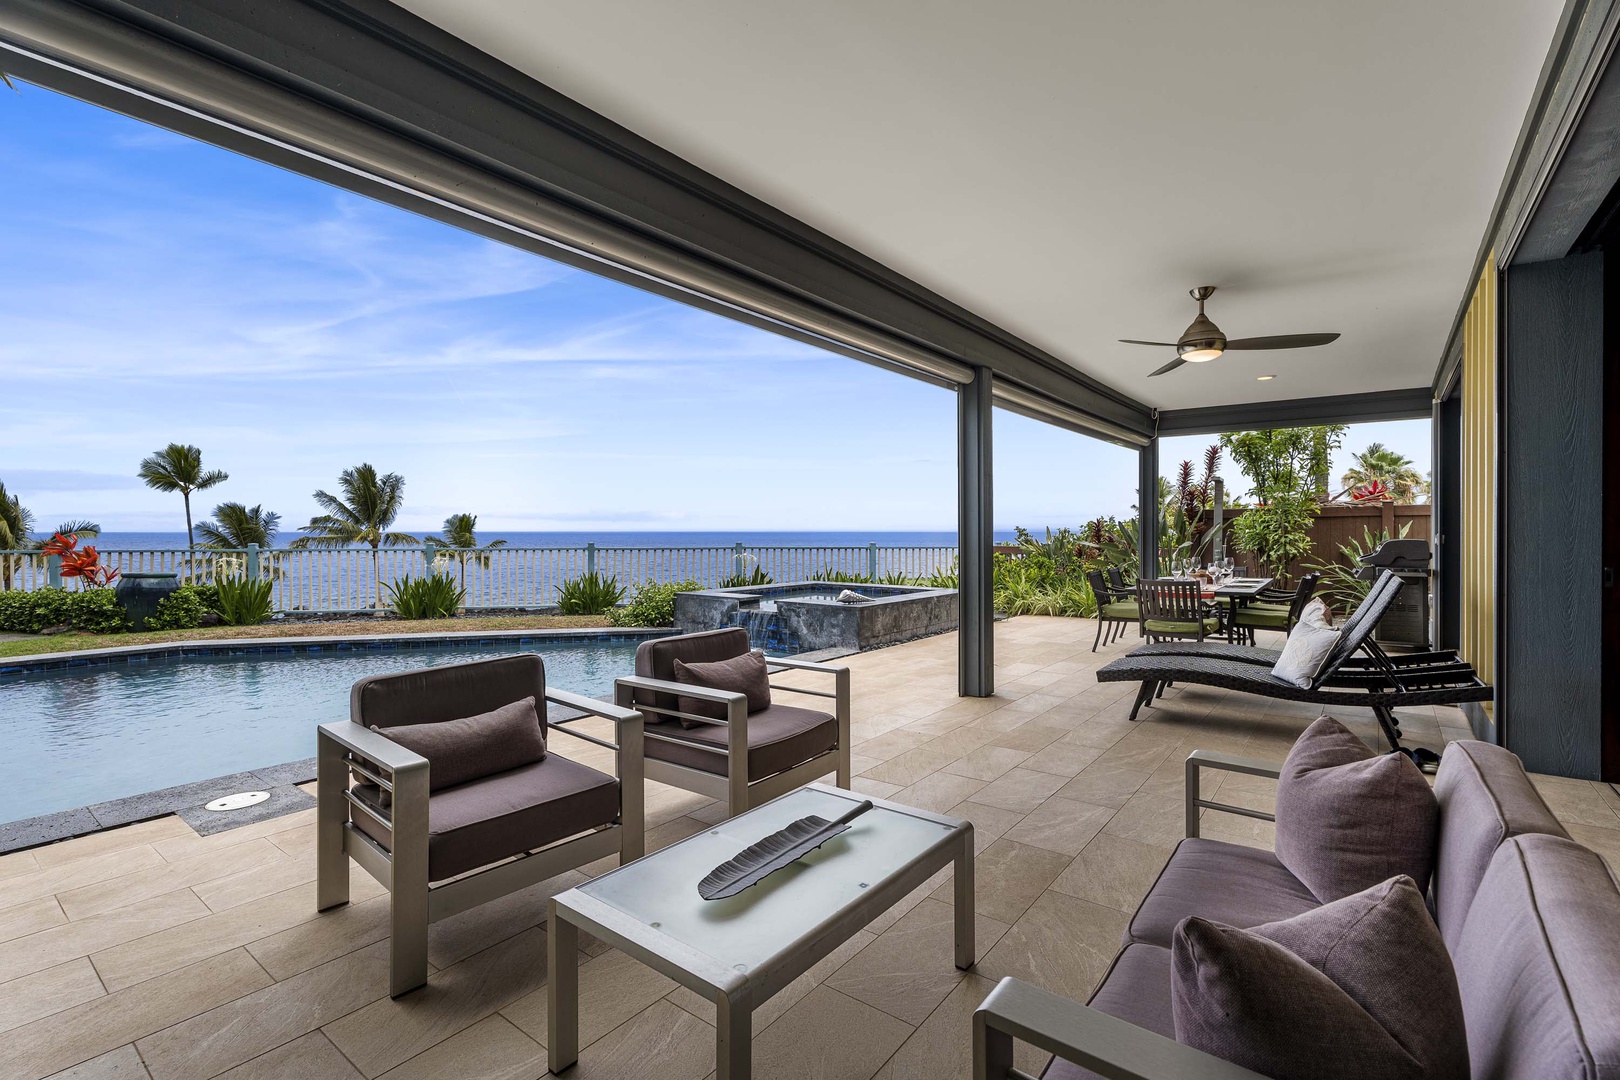 Kailua Kona Vacation Rentals, Holua Kai #20 - Sunsets from the home are magnificent!